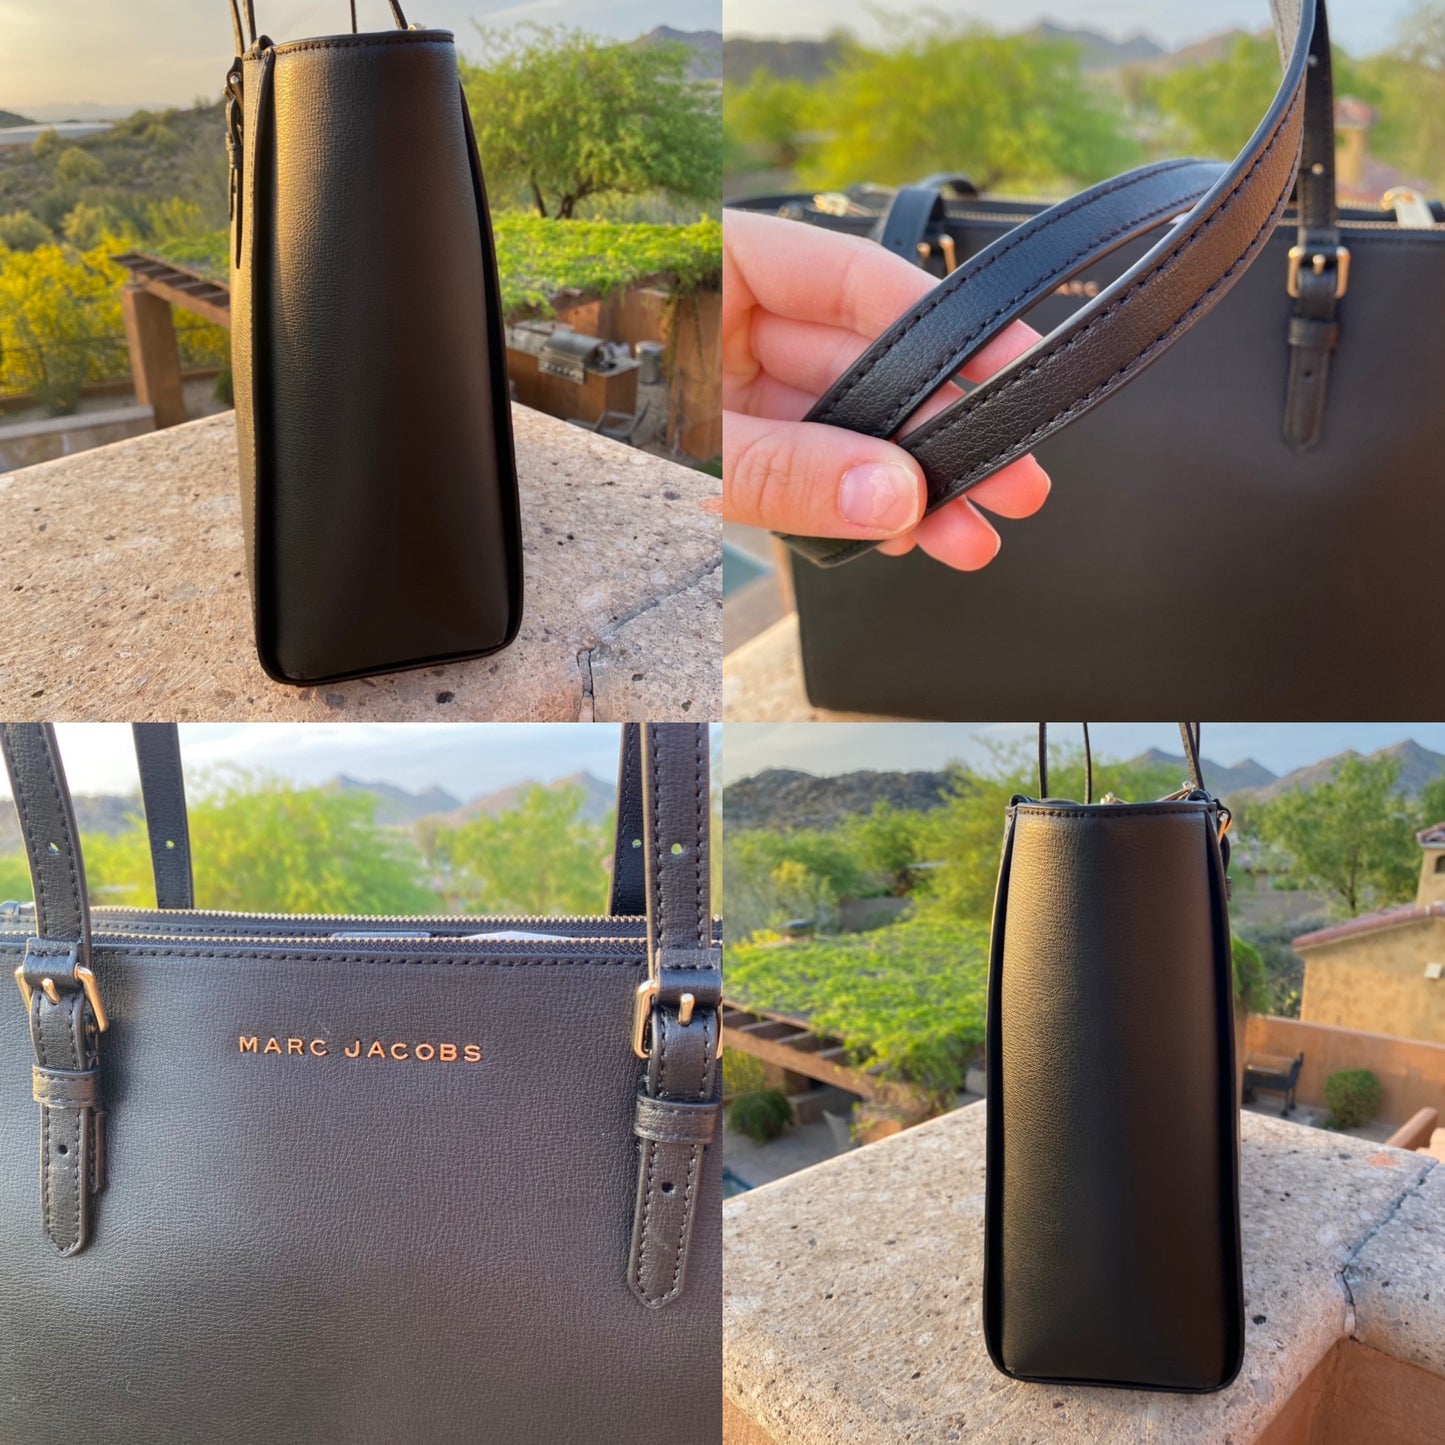 Marc Jacobs Commuter Leather Tote